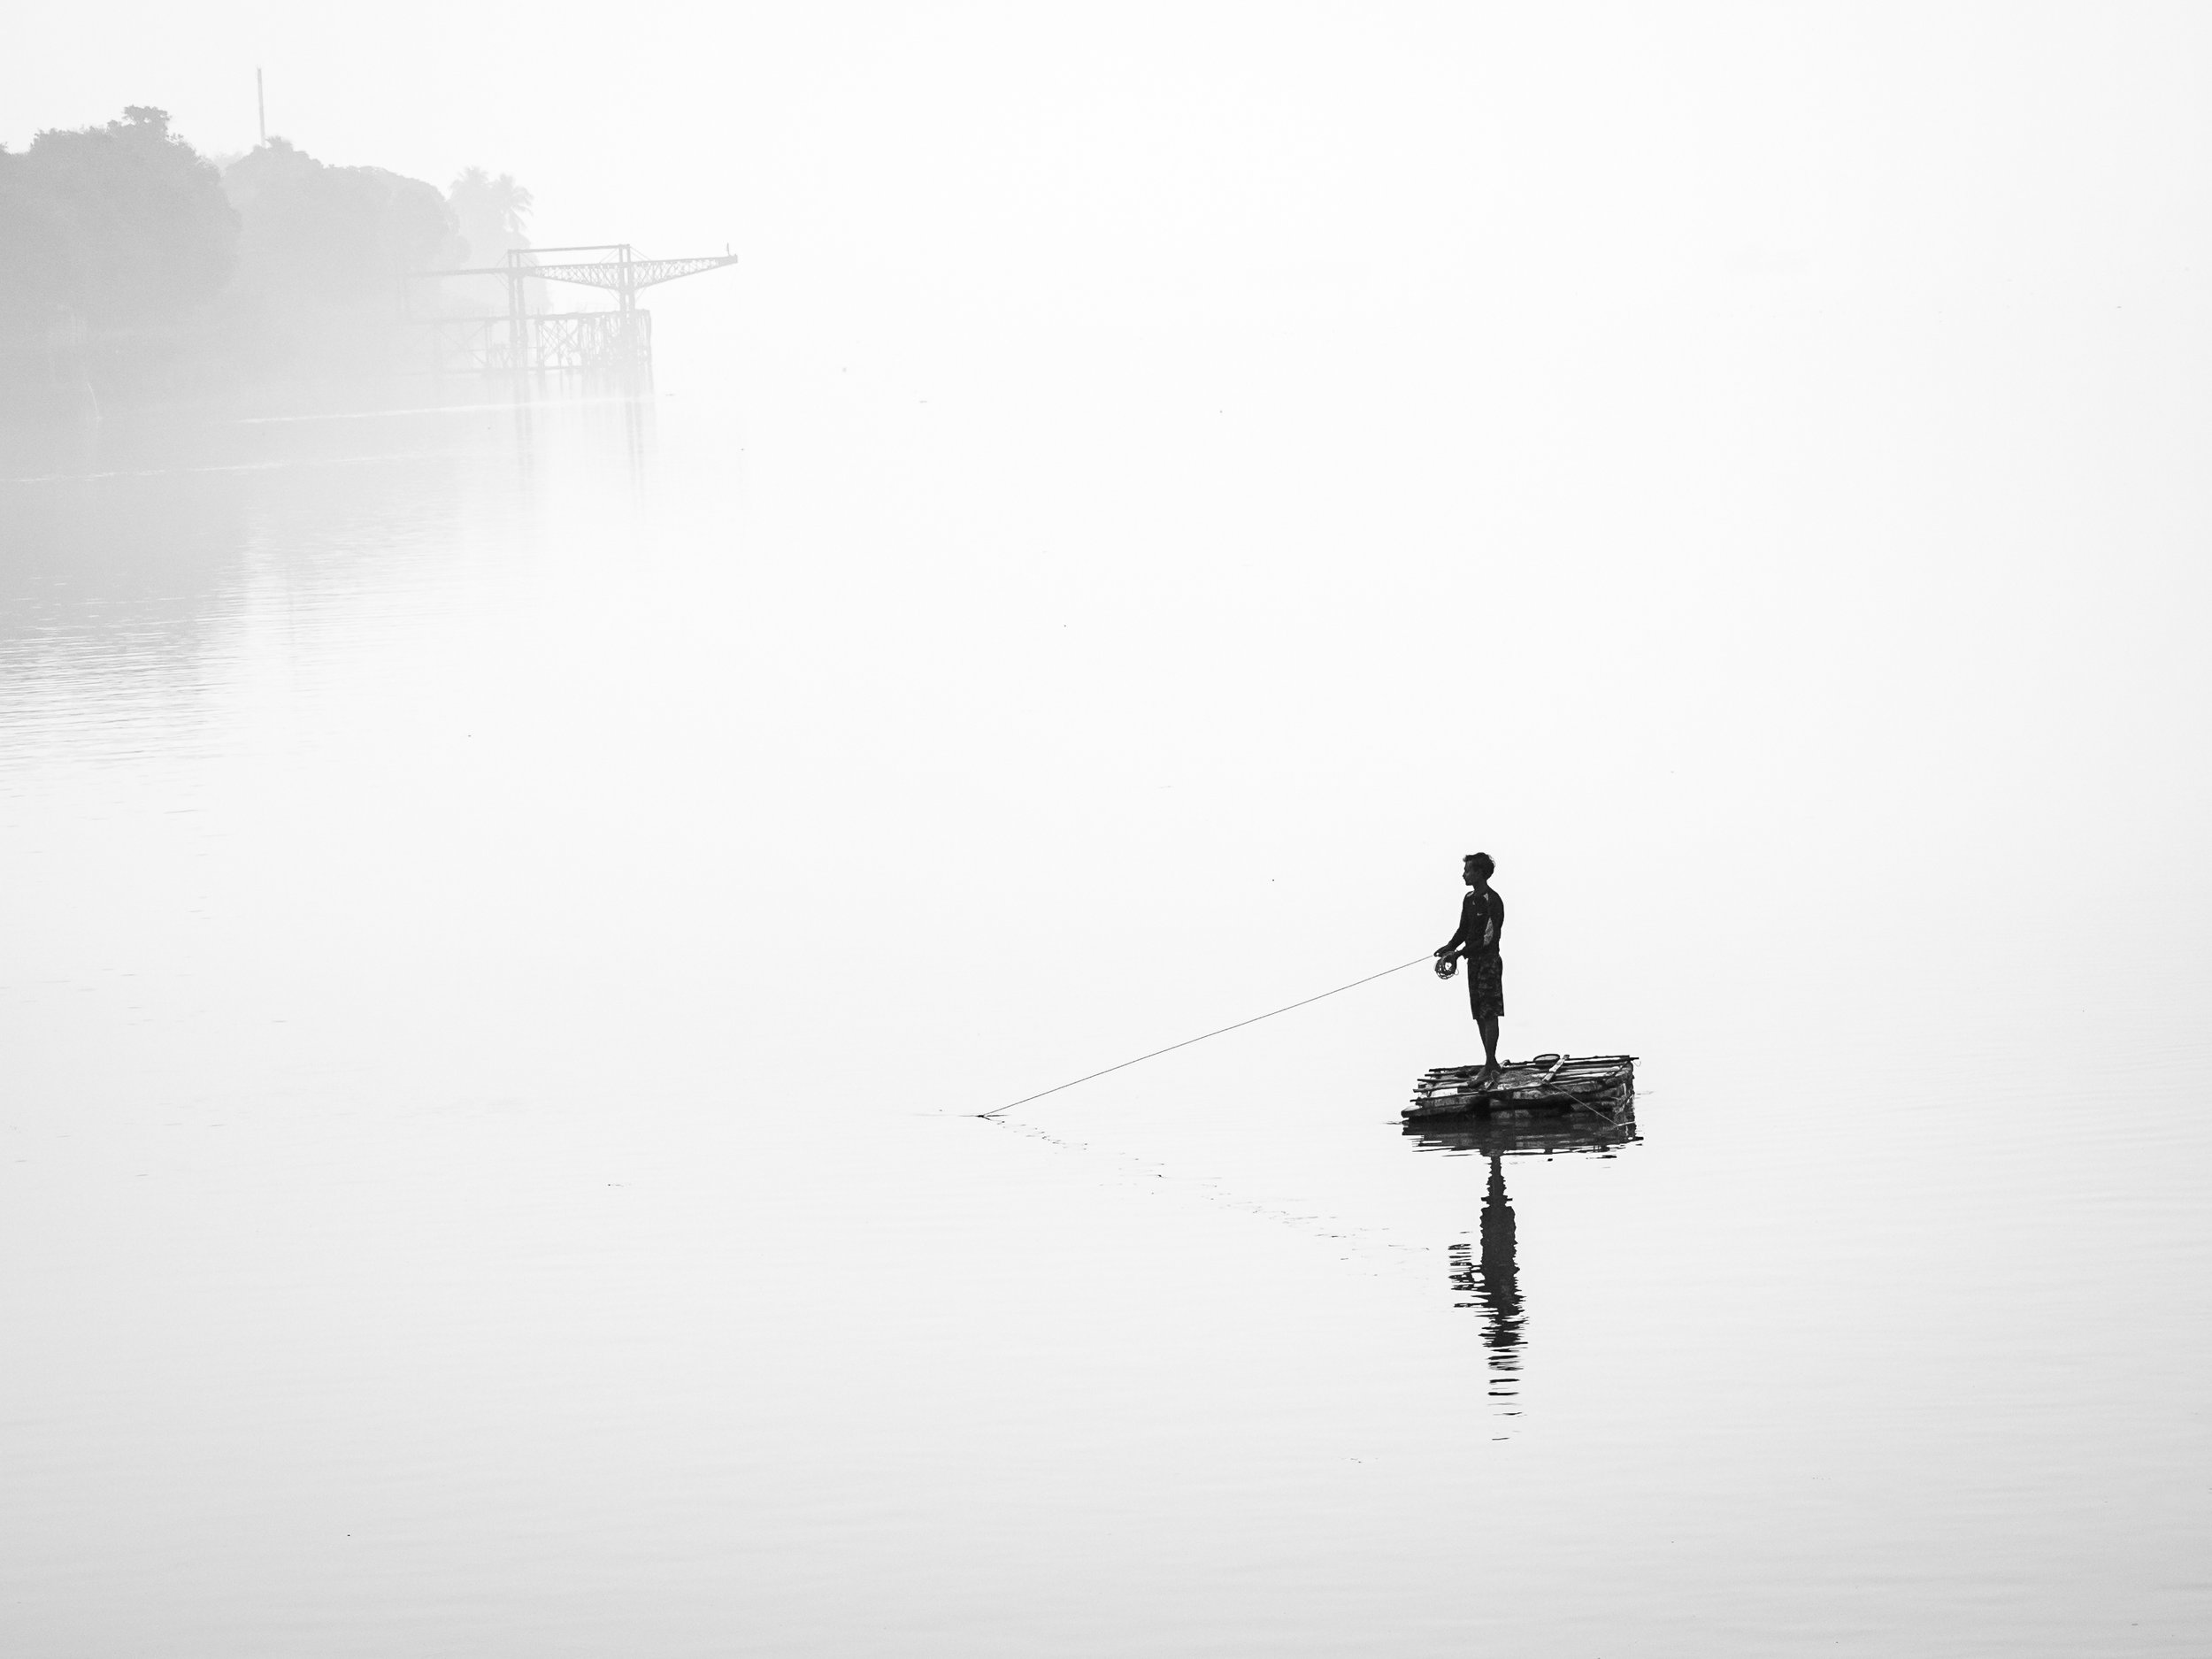 Fishing on the Ganges